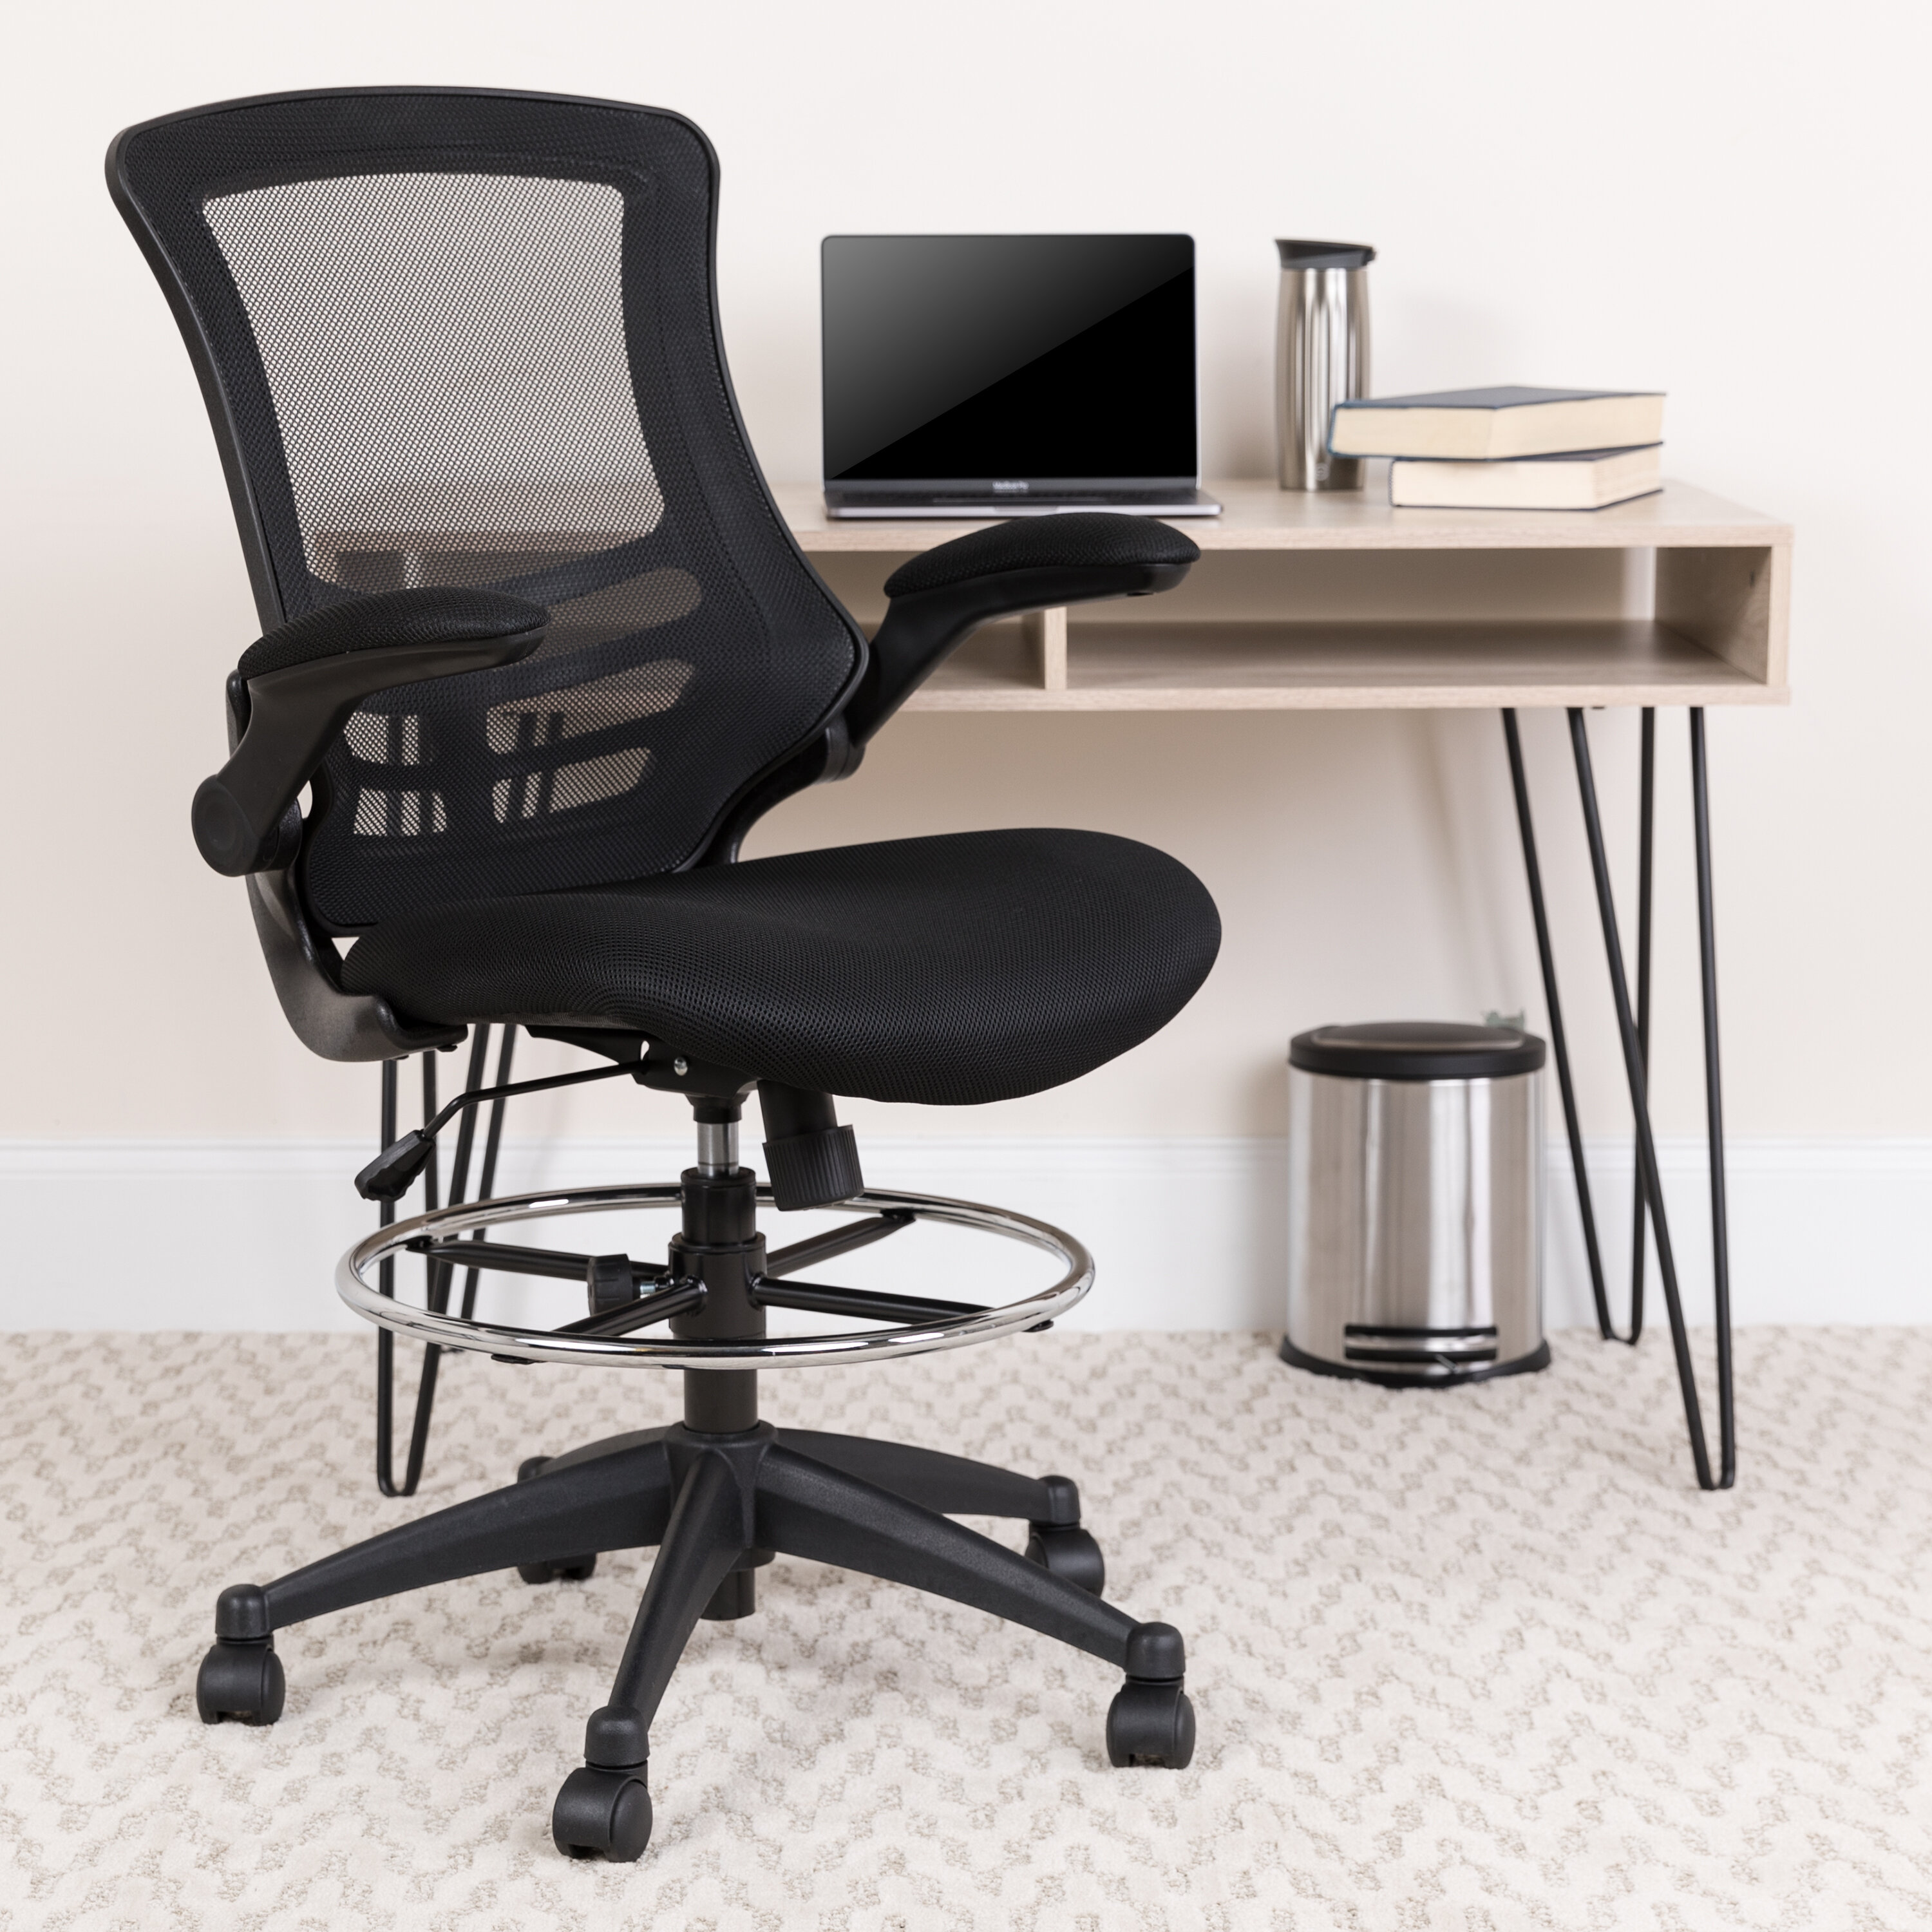 Black Drafting Chair Standing Desk Chair Rolling Chair Mesh Office Chair Height Adjustable Tall Chair Drafting Stool Task Chairs with Ergonomic Footrest Lumbar Support and Flip Up Armrest 